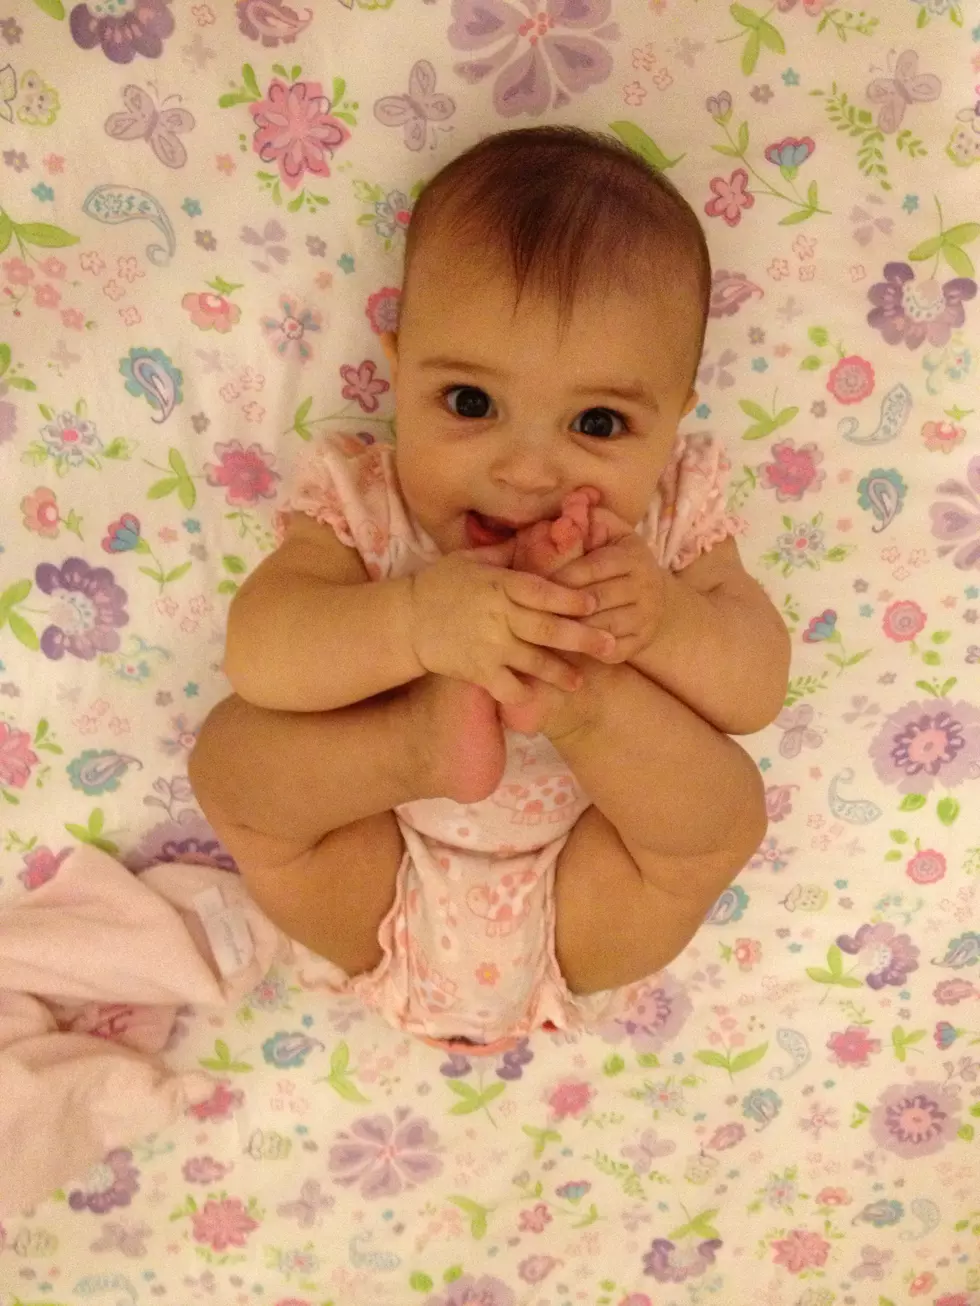 VOTE &#8212; Western New York&#8217;s Cutest Baby, Group 6 [POLL]